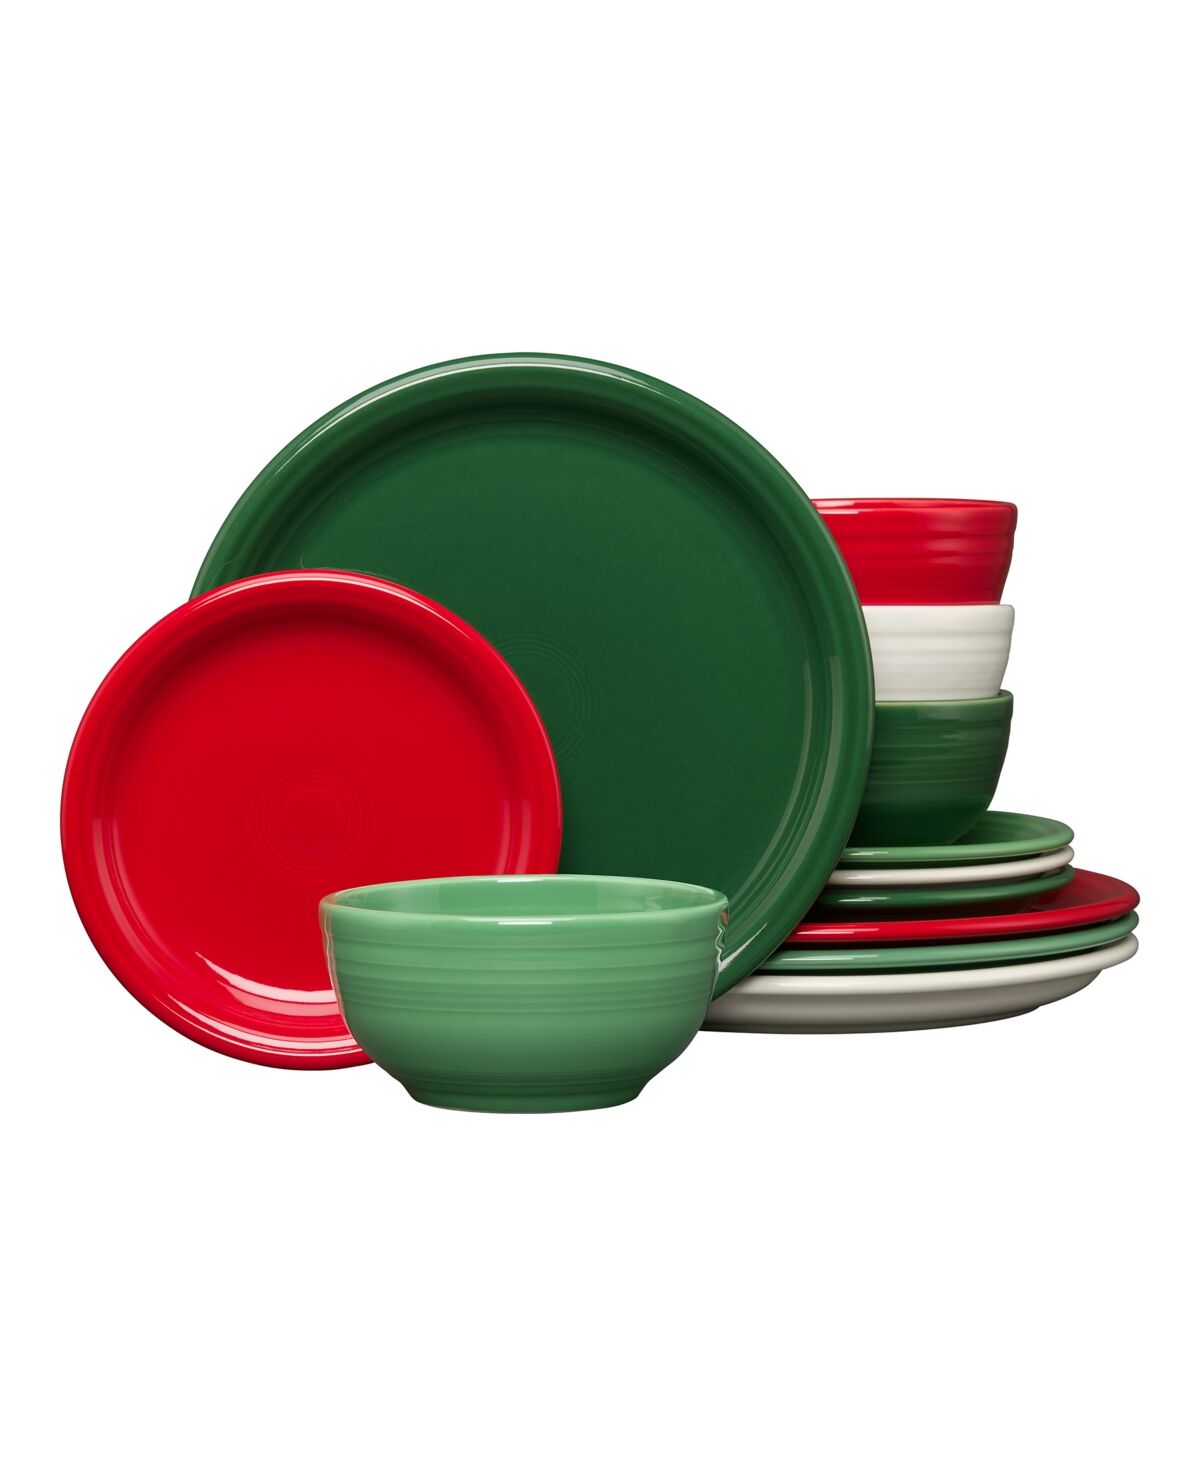 Fiesta Christmas Mixed Colors 12-Pc Bistro Dinnerware Set, Service for 4 - Mixed Chri